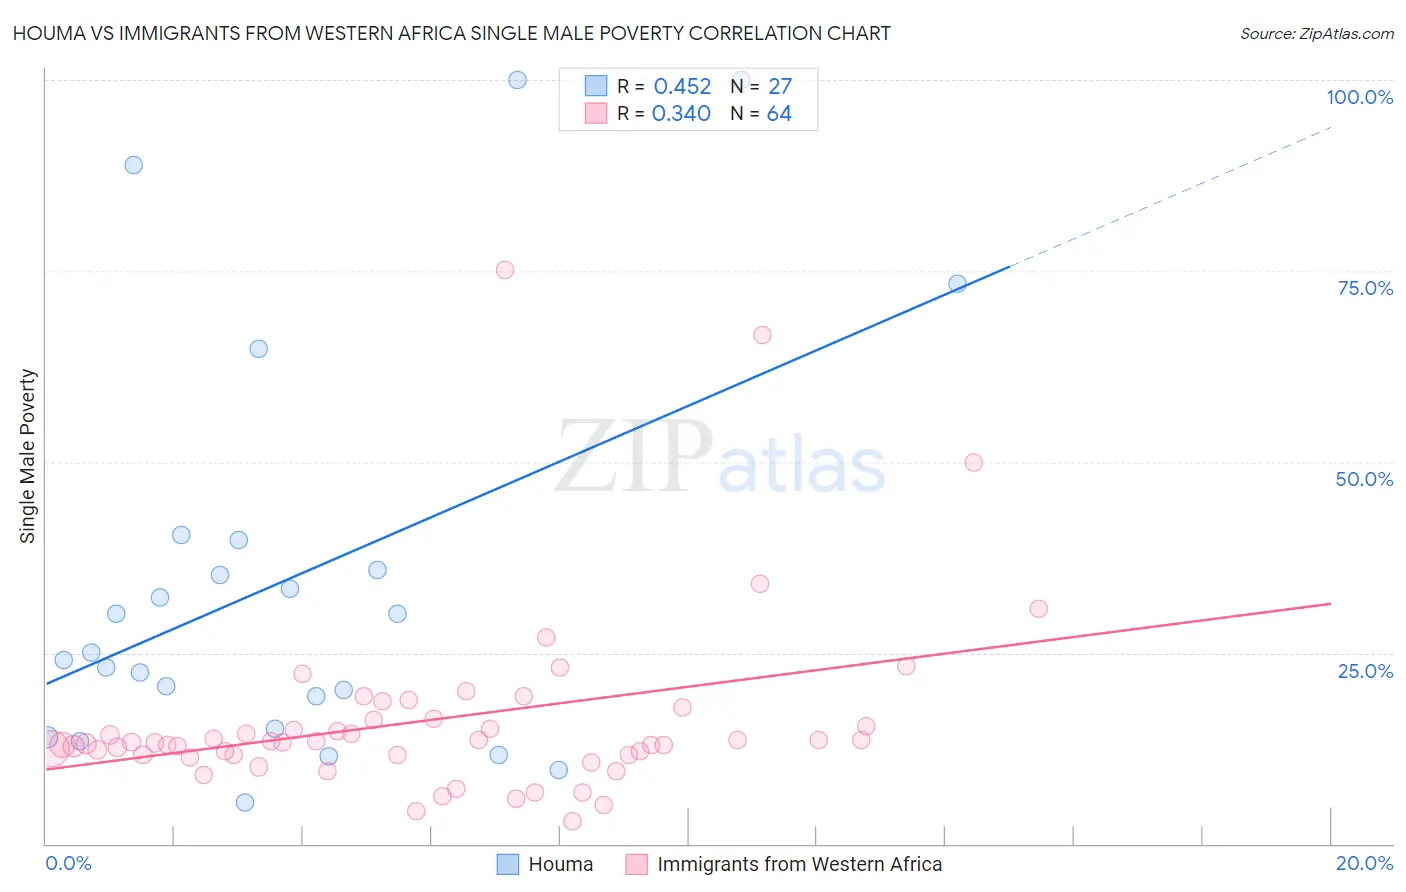 Houma vs Immigrants from Western Africa Single Male Poverty